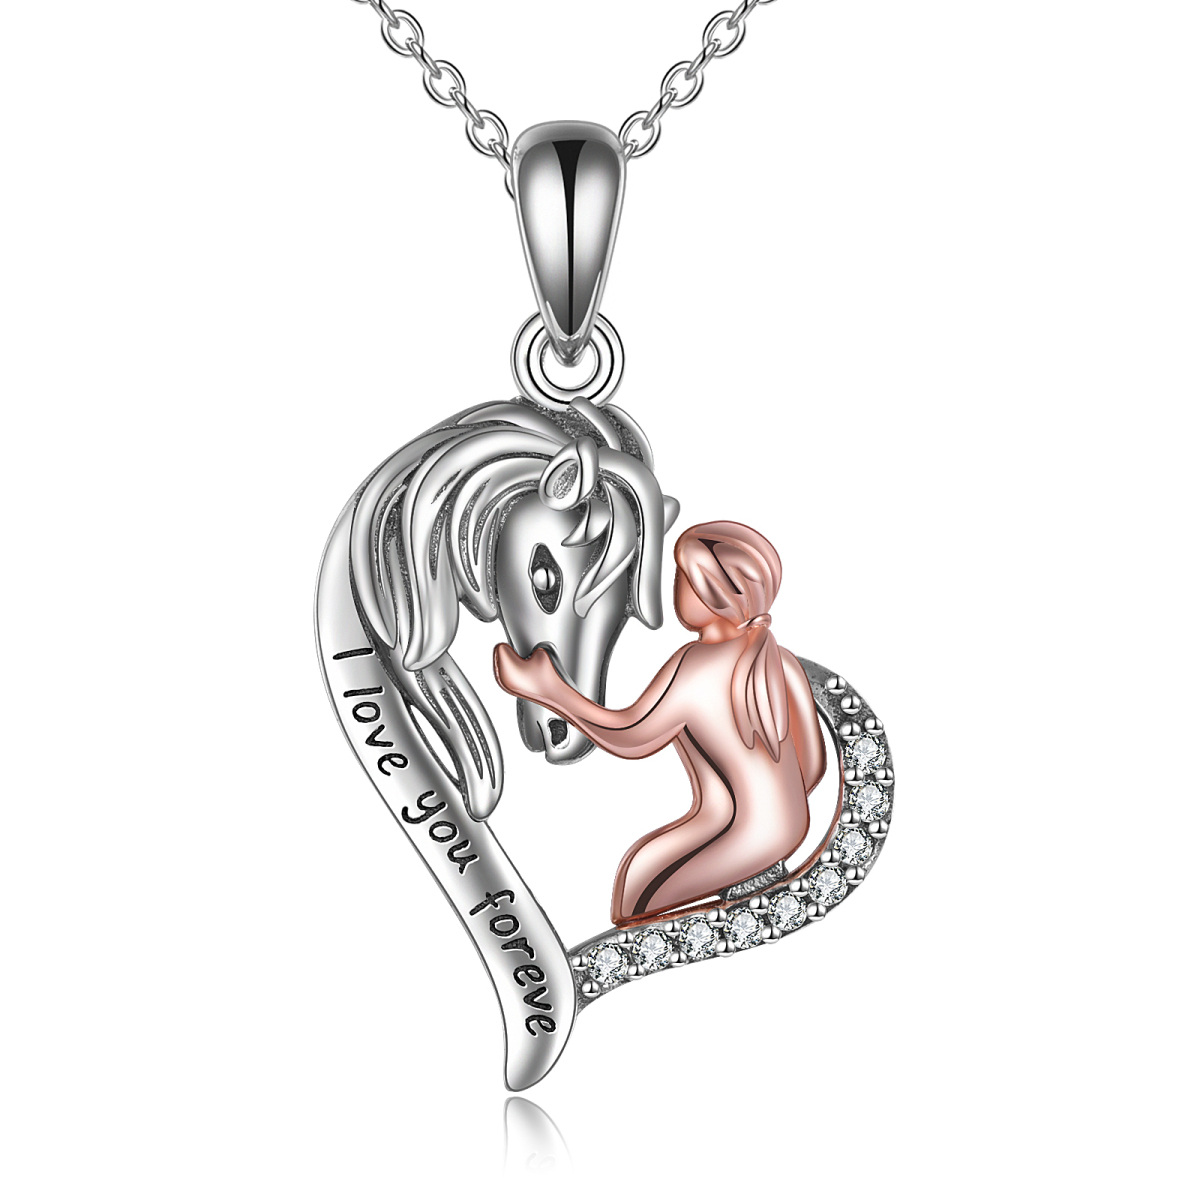 Sterling Silver Circular Shaped Horse & Heart Pendant Necklace with Engraved Word-1